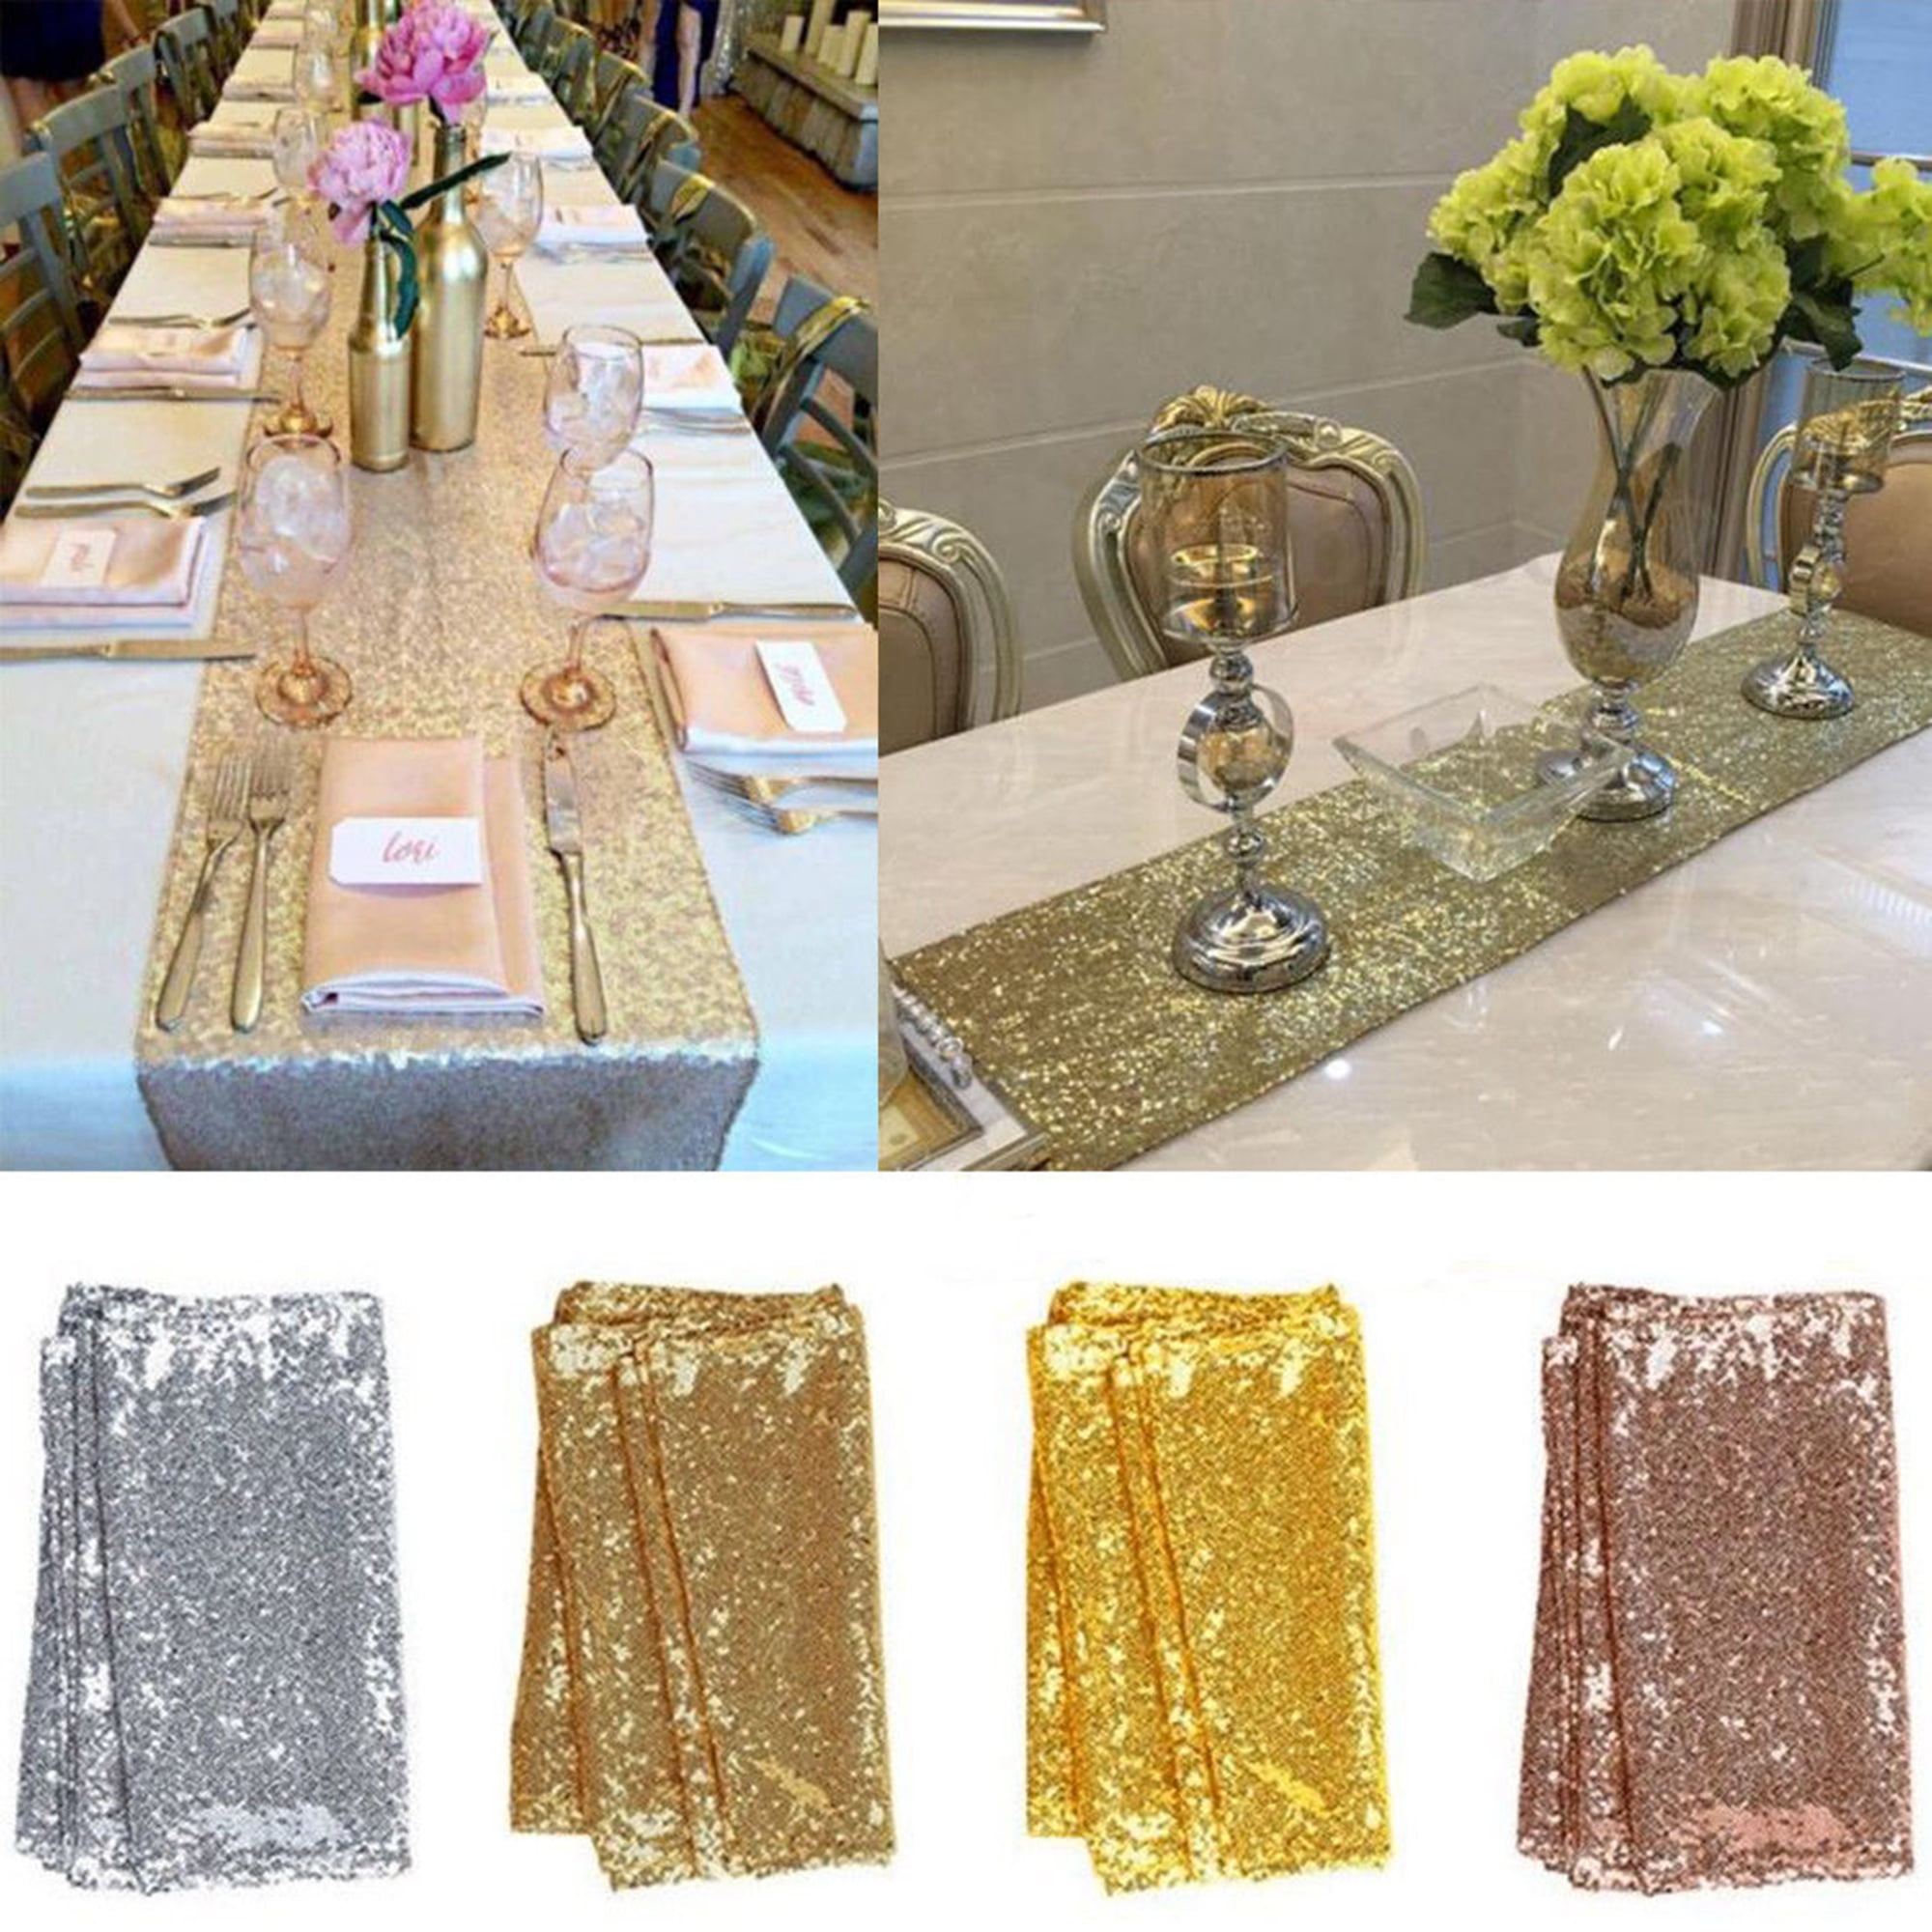 TRLYC Sparkly Christmas Sequin Table Runner 13-In X 156-Inch Wedding Sequin Tablerunner,Rose Gold 